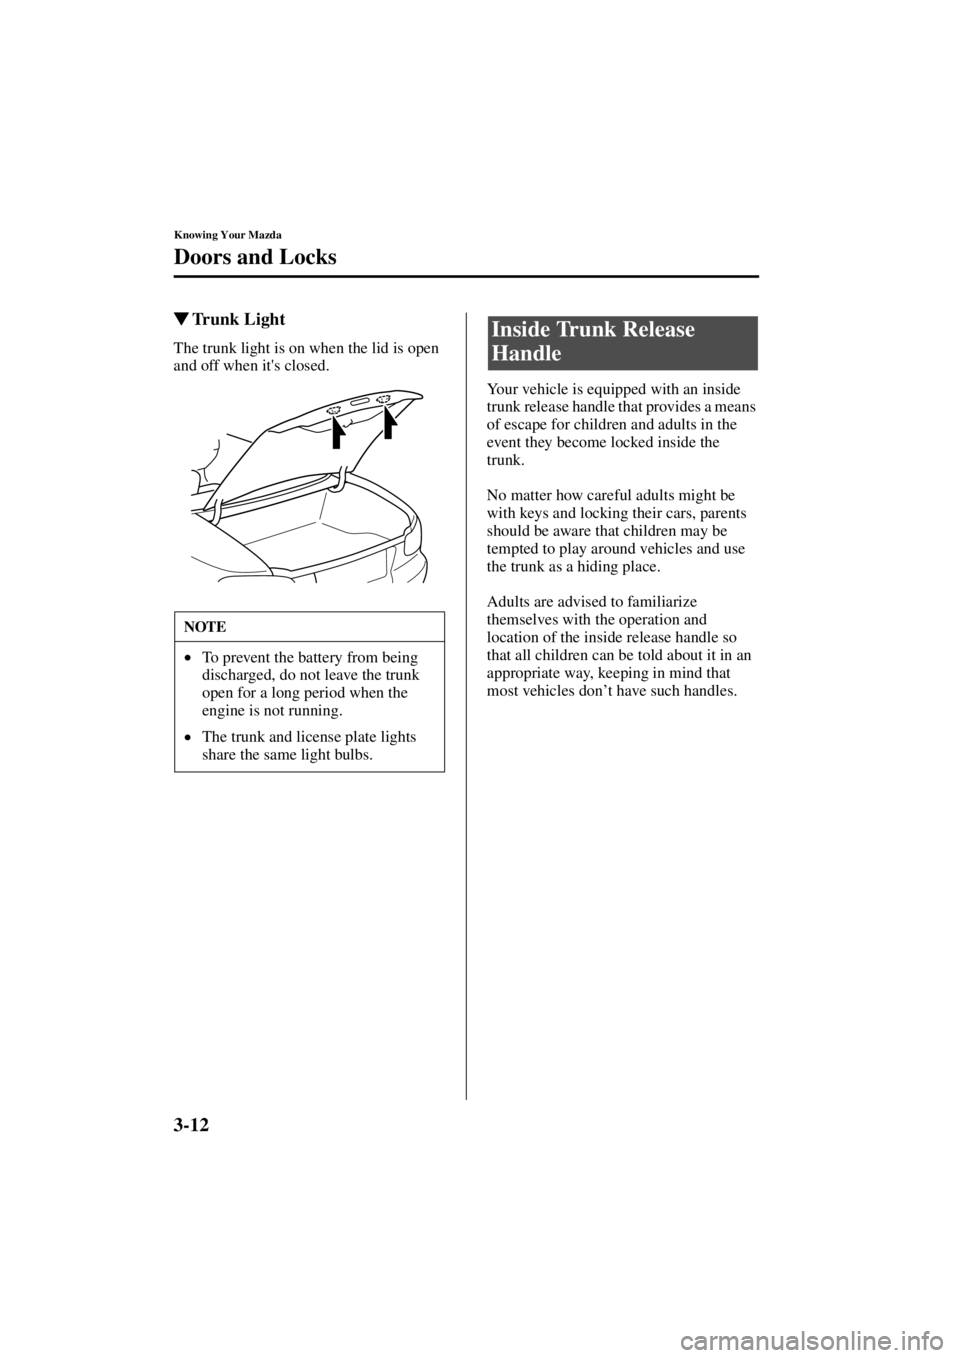 MAZDA MODEL SPEED MX-5 MIATA 2004  Owners Manual 3-12
Knowing Your Mazda
Doors and Locks
Form No. 8T02-EA-03L
Trunk Light
The trunk light is on when the lid is open 
and off when its closed.  
Your vehicle is equipped with an inside 
trunk release